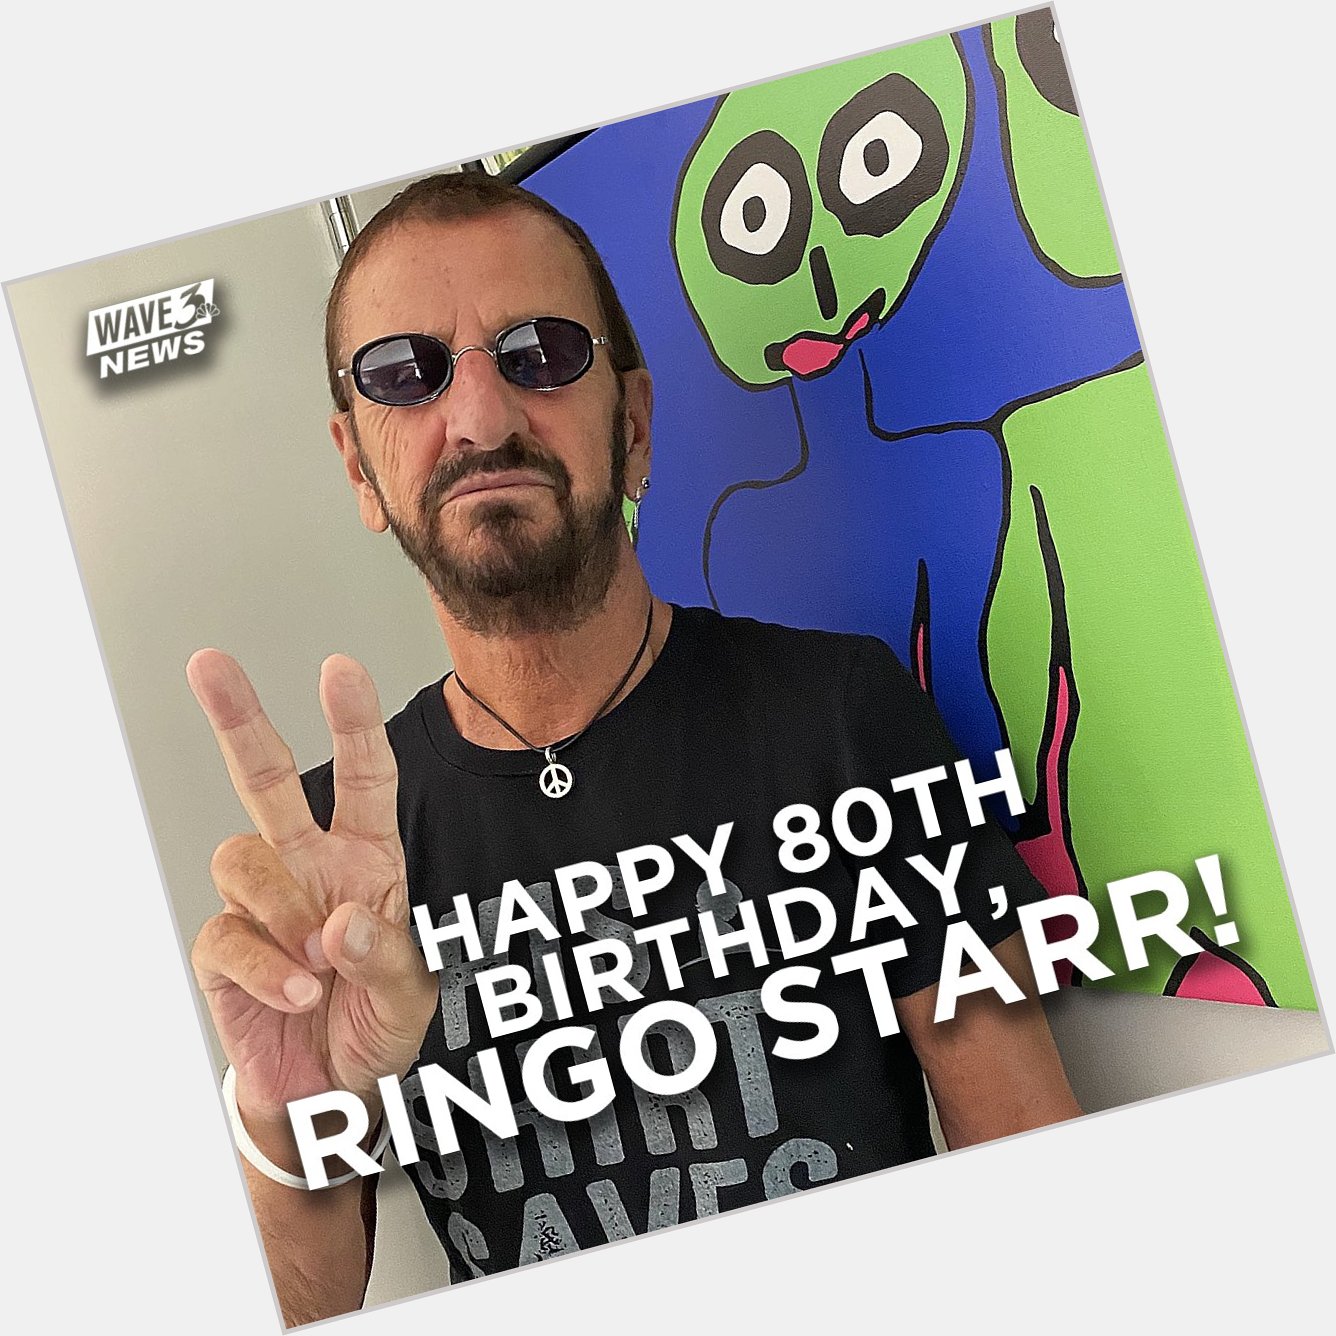 Peace and love!    Happy 80th Birthday to Ringo Starr!

Drop your favorite Beatles song in the comments! 